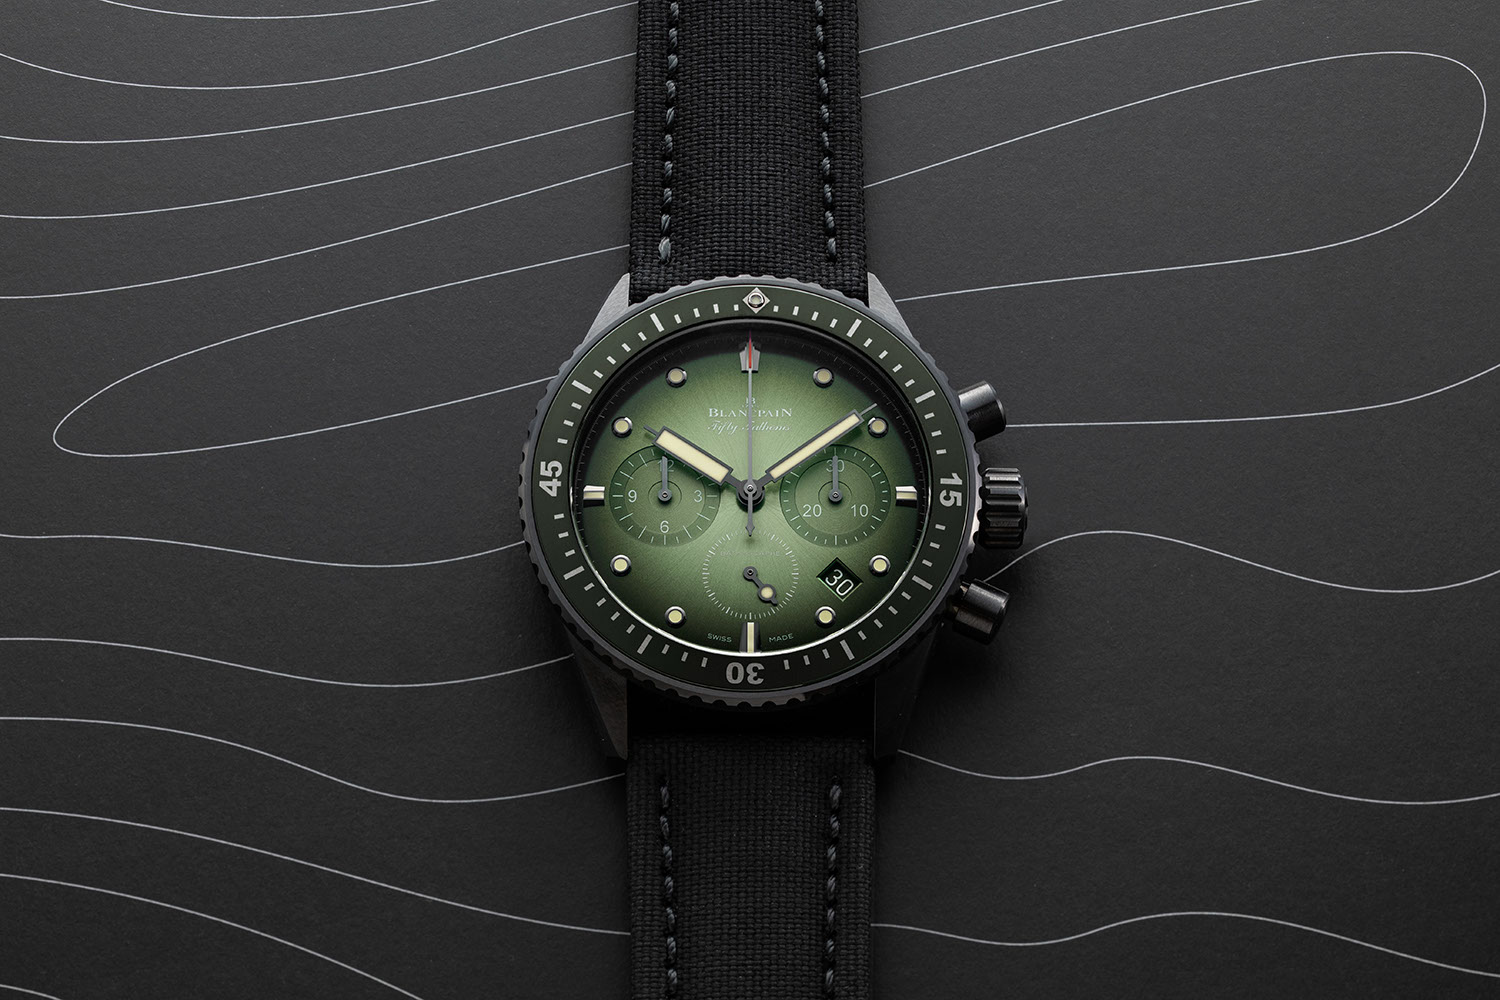 The Blancpain Fifty Fathoms Bathyscaphe Chronographe Flyback in Green (©Revolution)